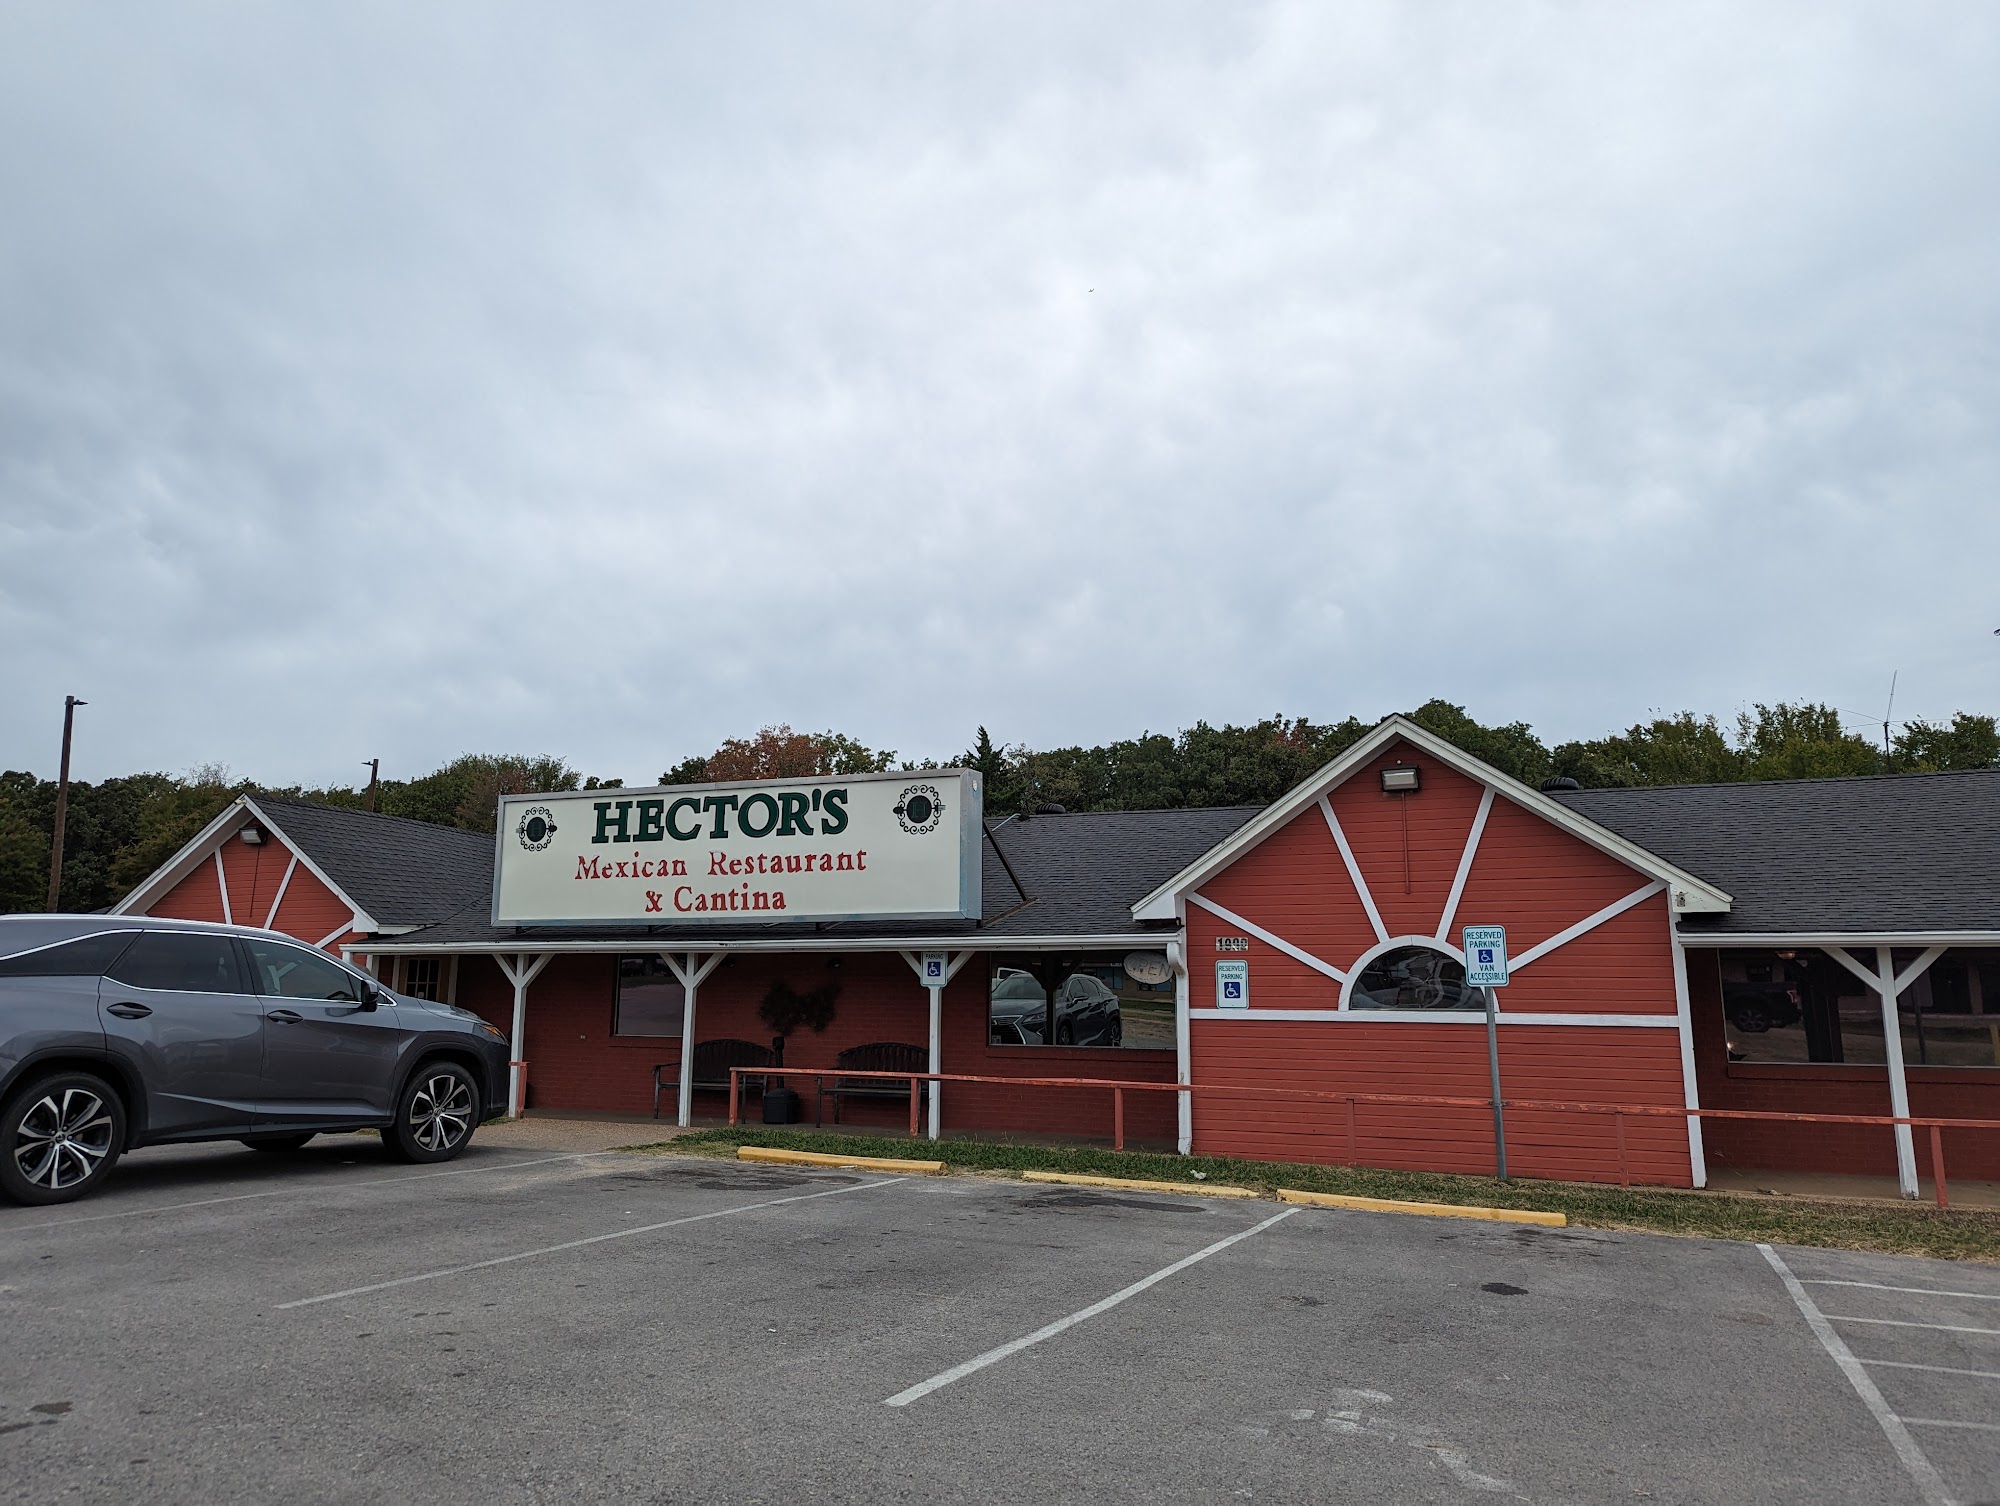 Hector's Mexican Restaurant